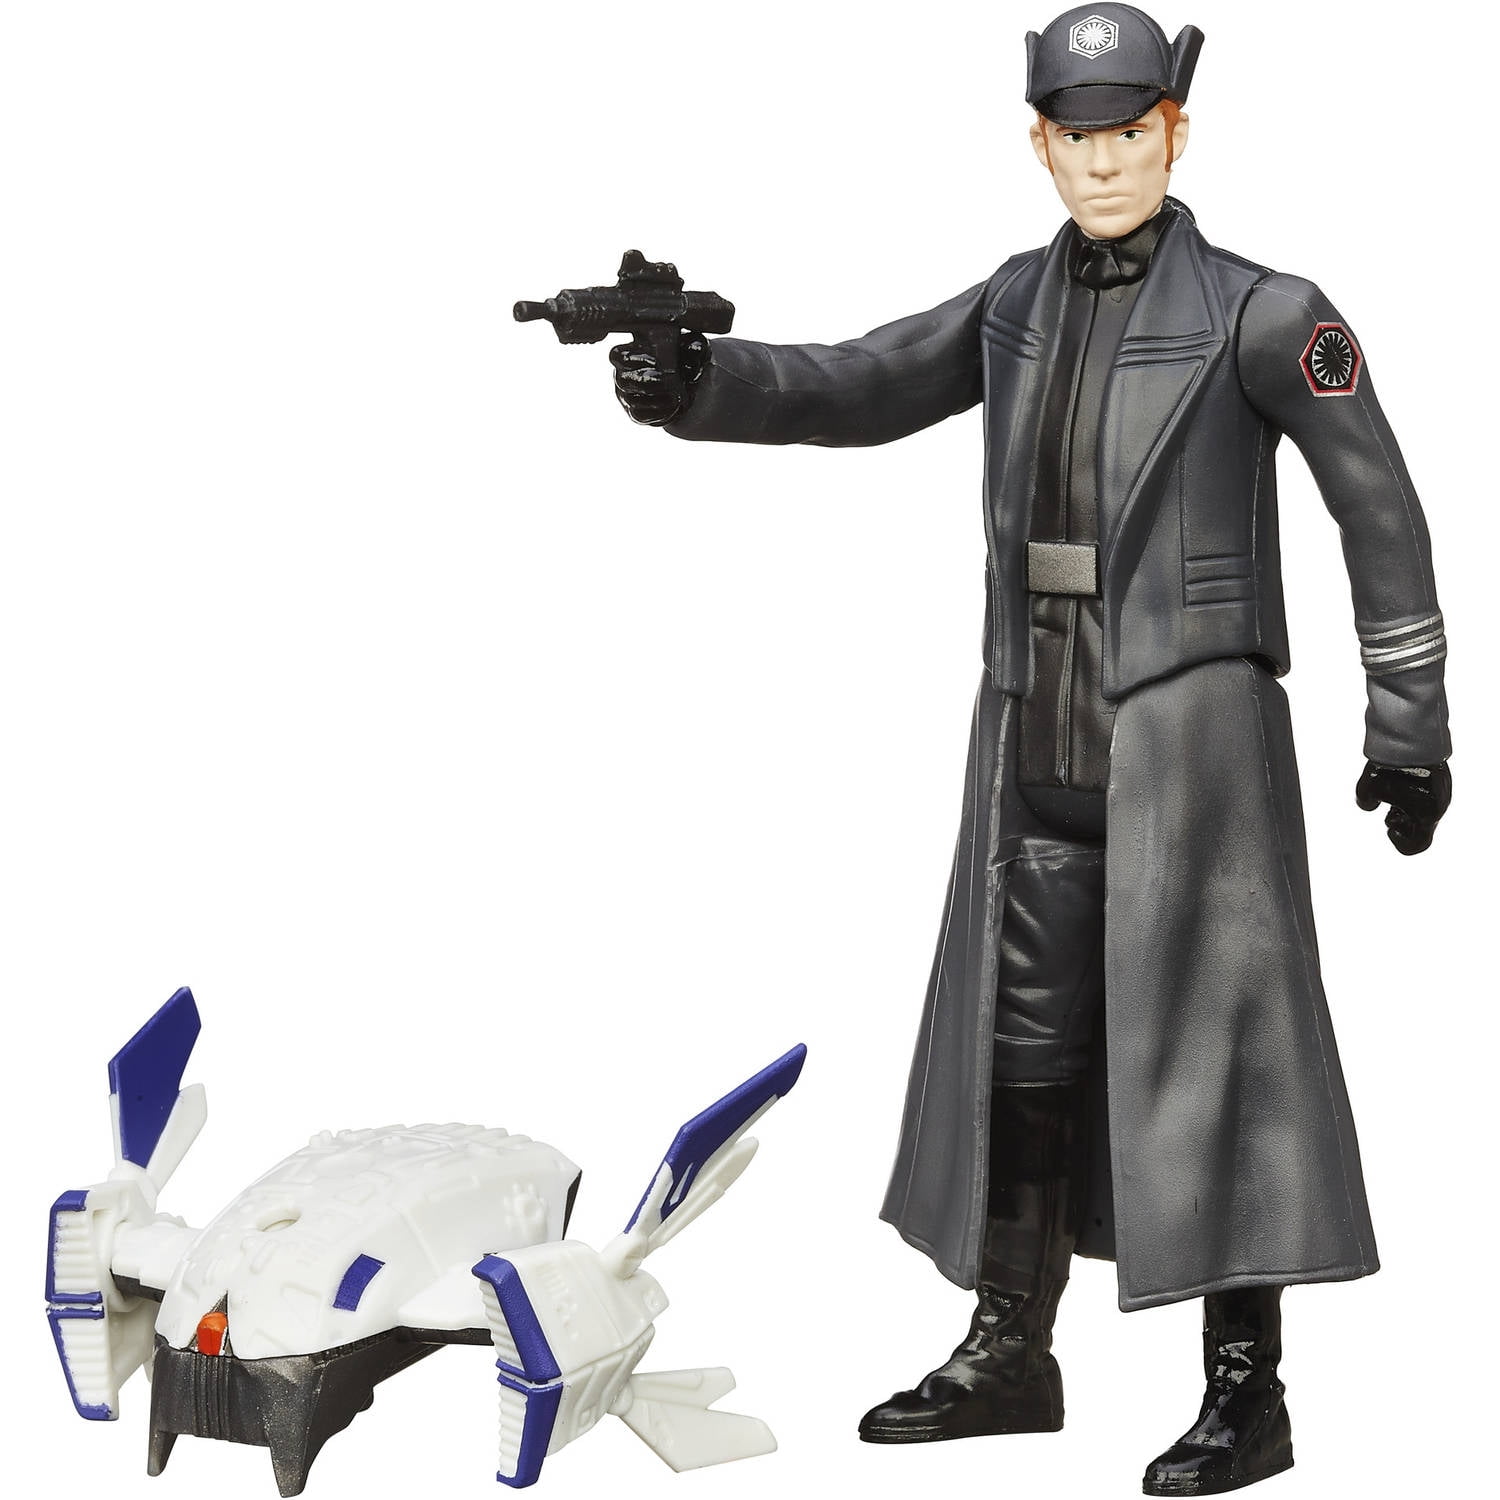 Hasbro The Force Awakens Space Mission Guavian Enforcer Action Figure for sale online 